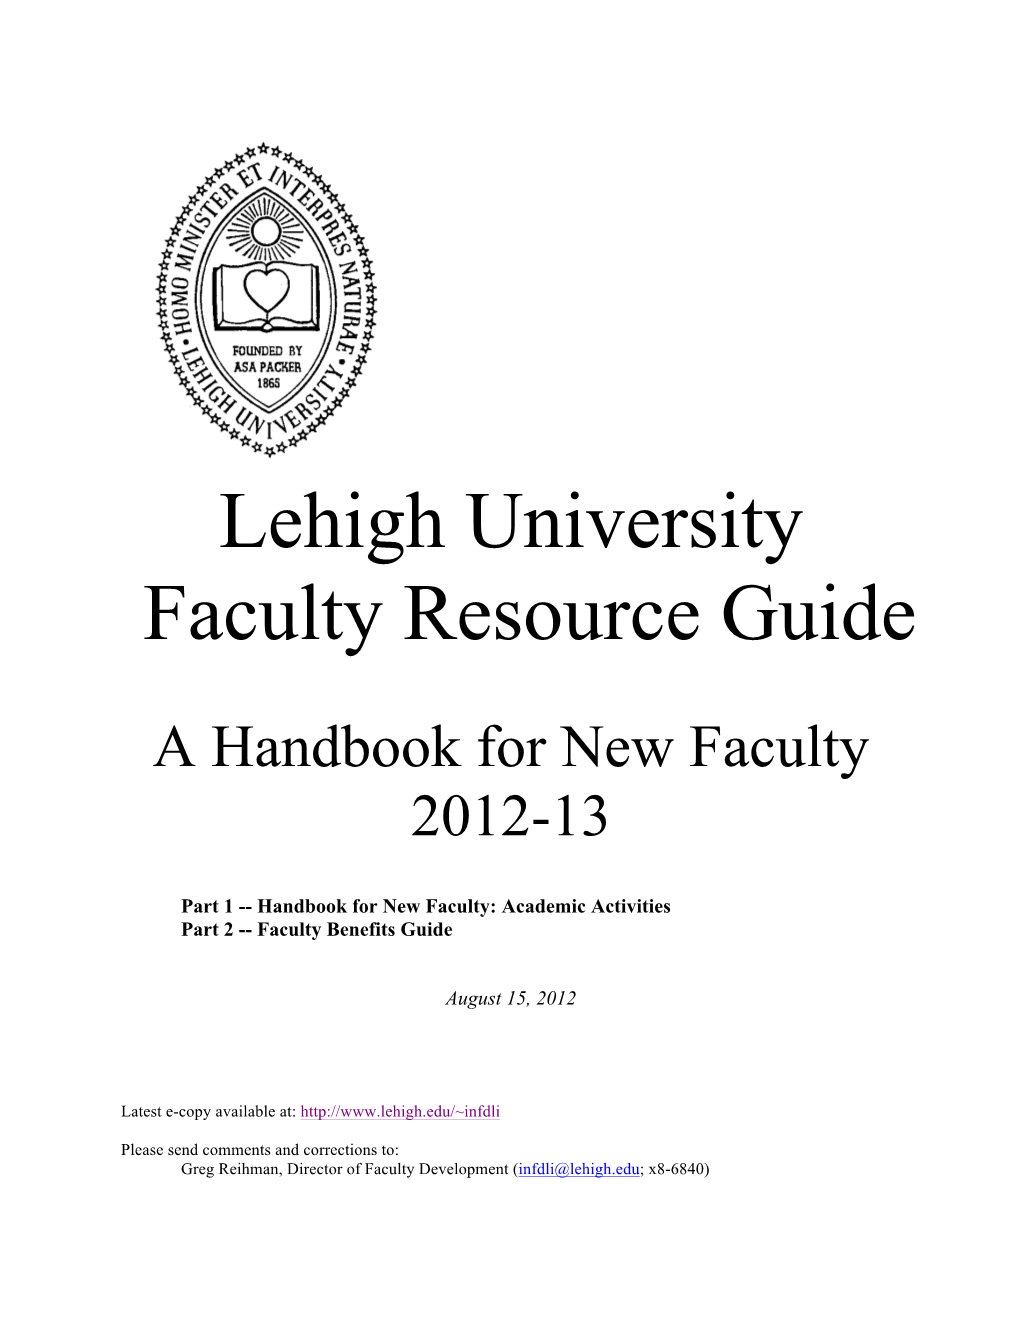 Lehigh University Faculty Resource Guide